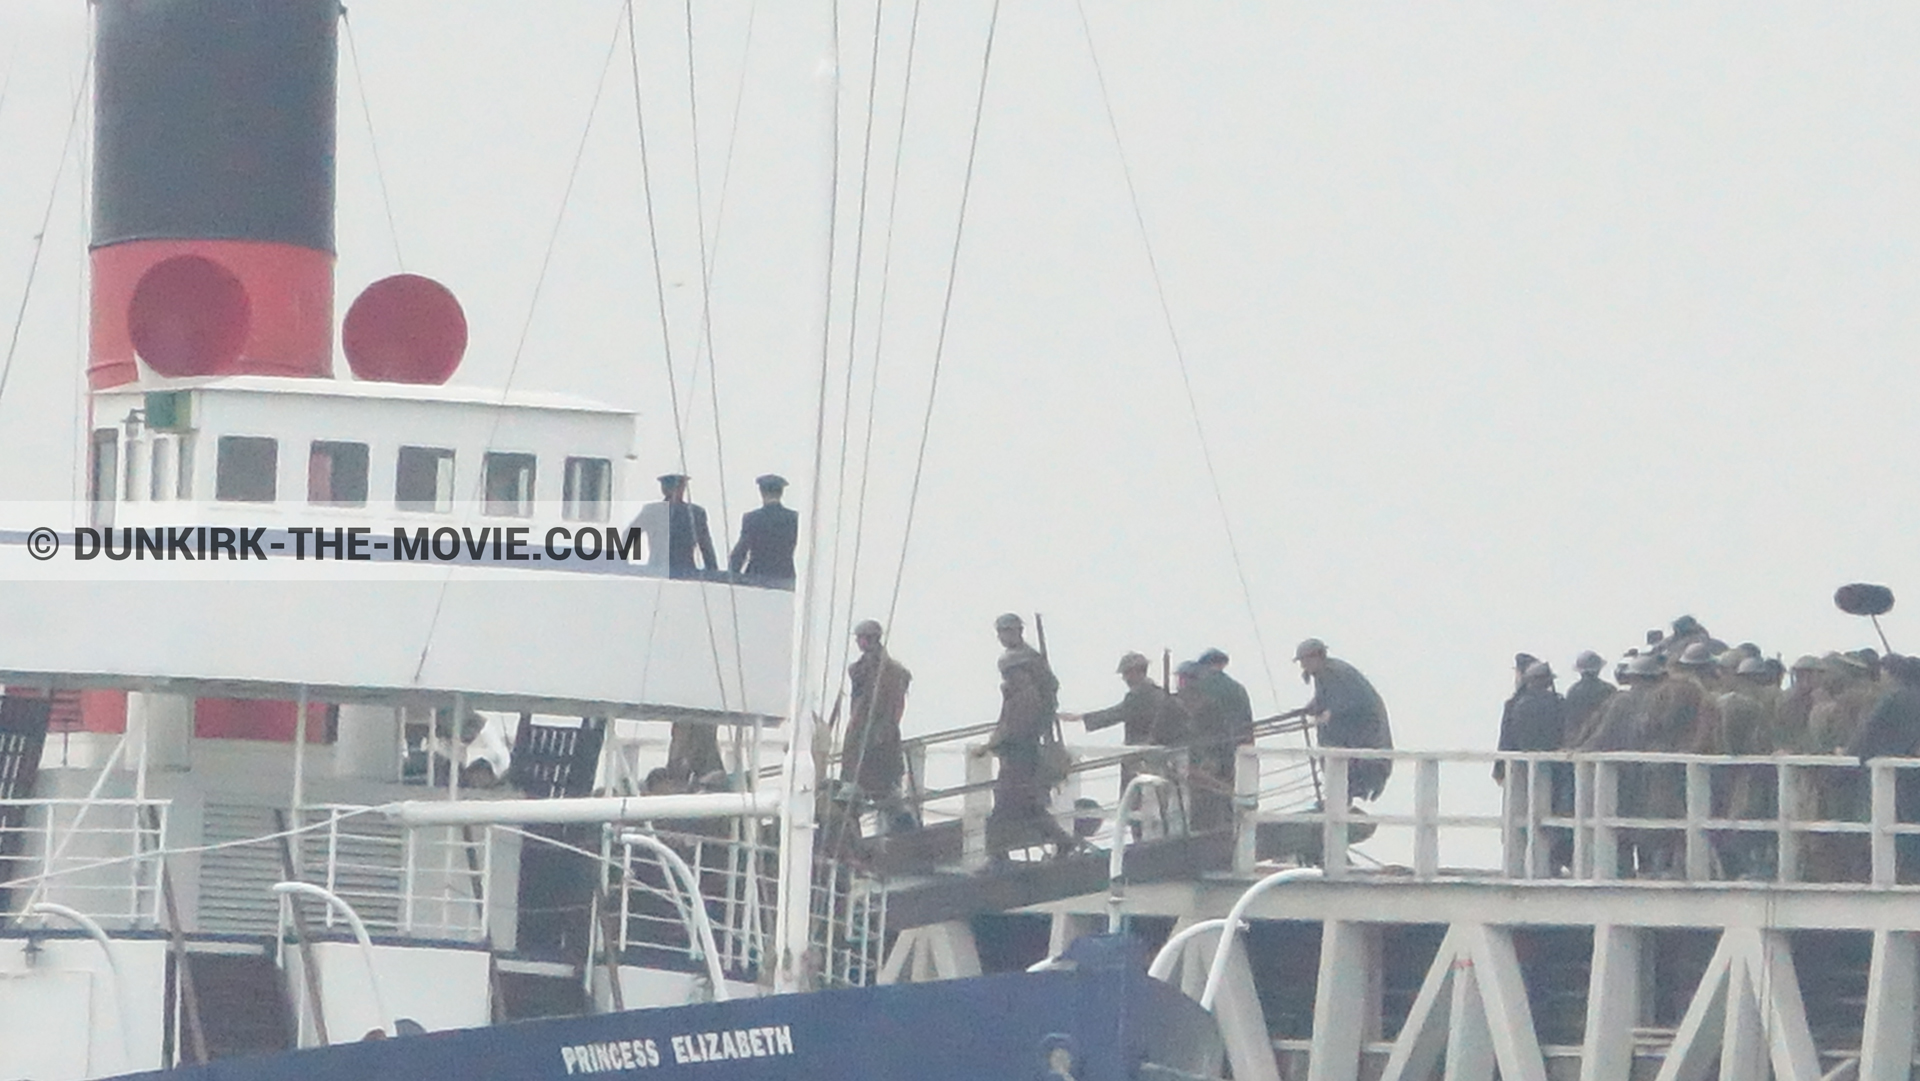 Picture with grey sky, supernumeraries, EST pier, Princess Elizabeth,  from behind the scene of the Dunkirk movie by Nolan